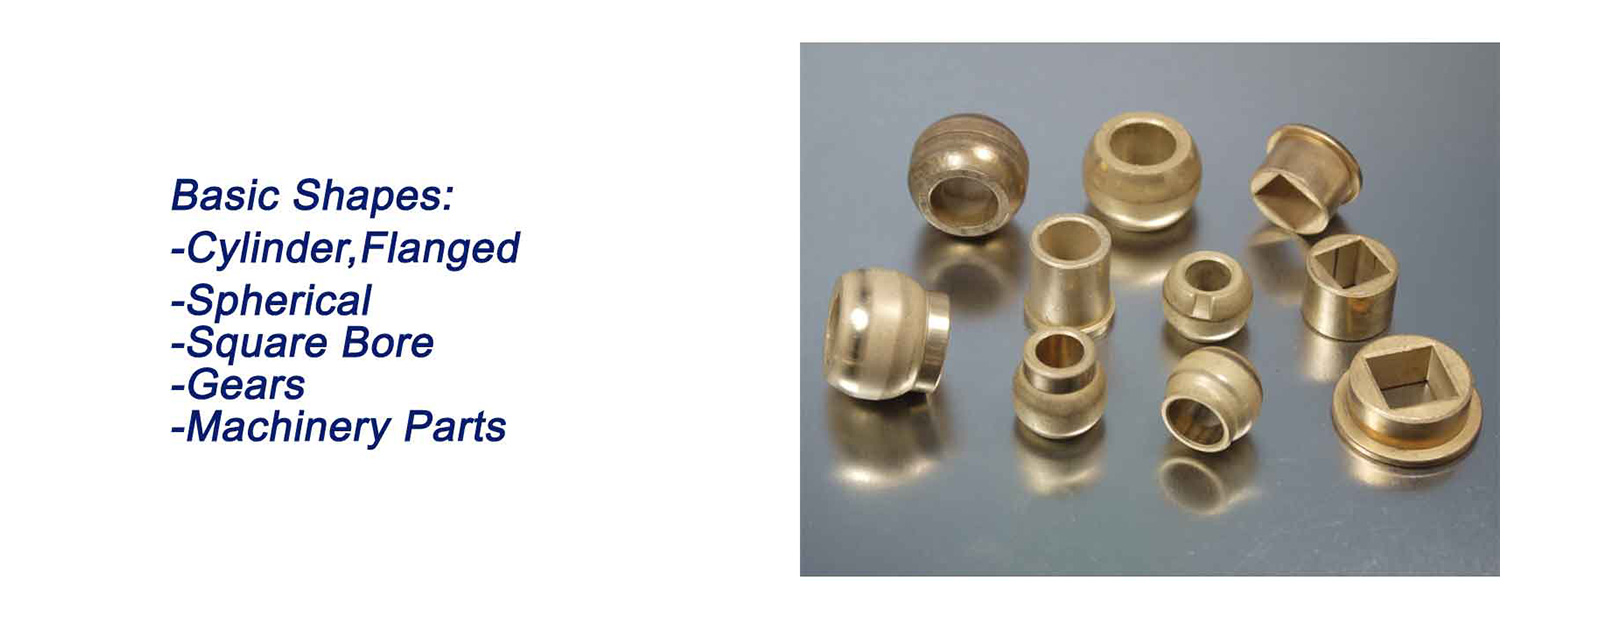 sintered PM parts by shapes